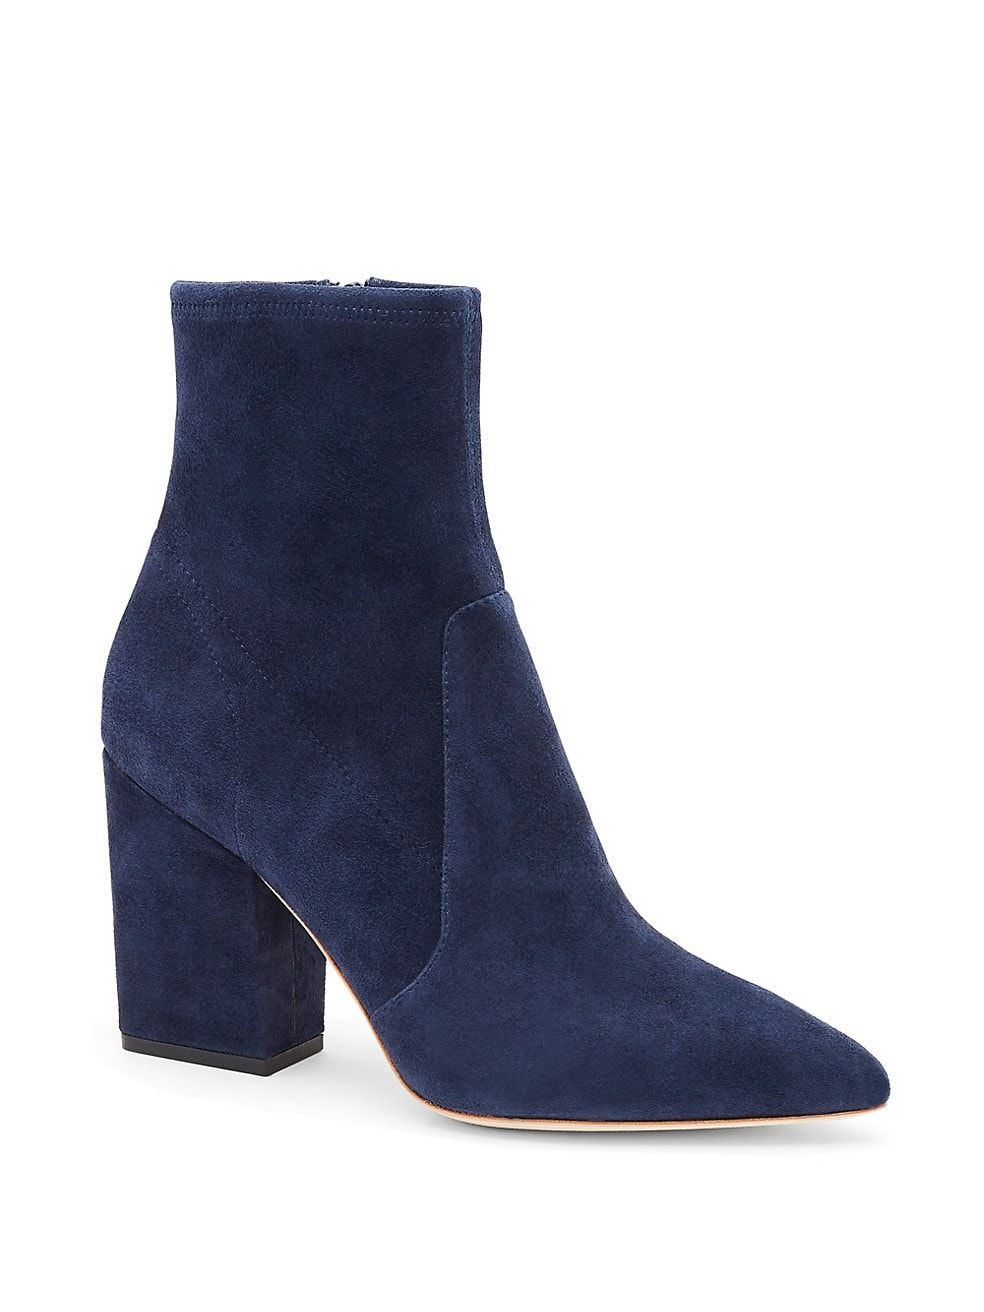 Isla Suede Ankle Boots | Saks Fifth Avenue